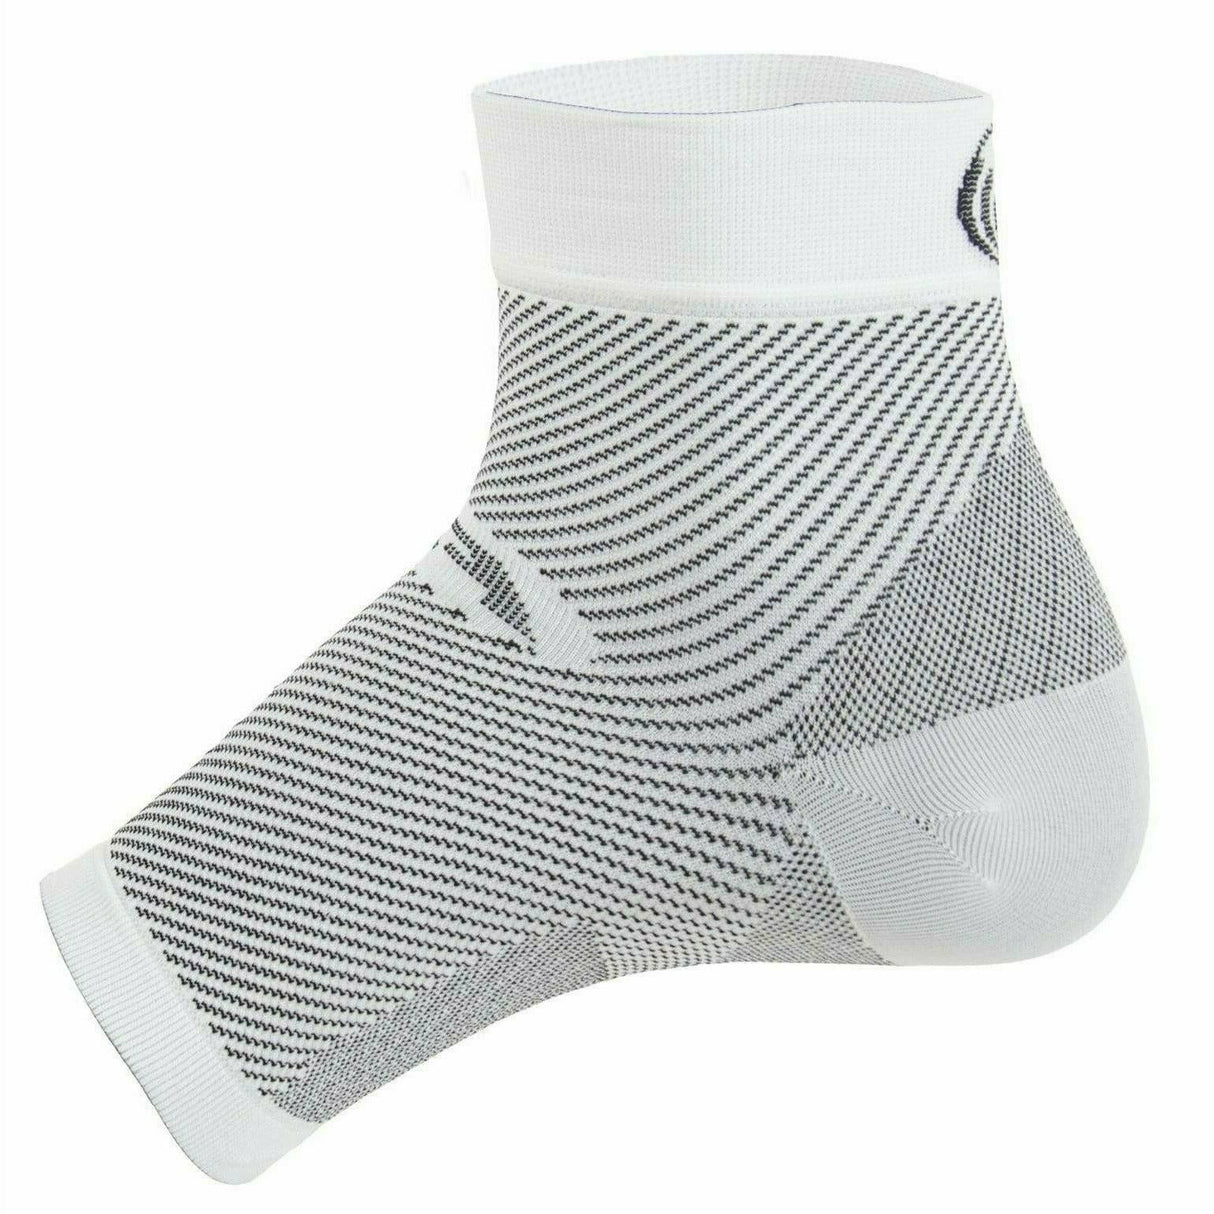 OS1st Plantar Fasciitis Performance Foot Sleeves  -  Small / White / Pair